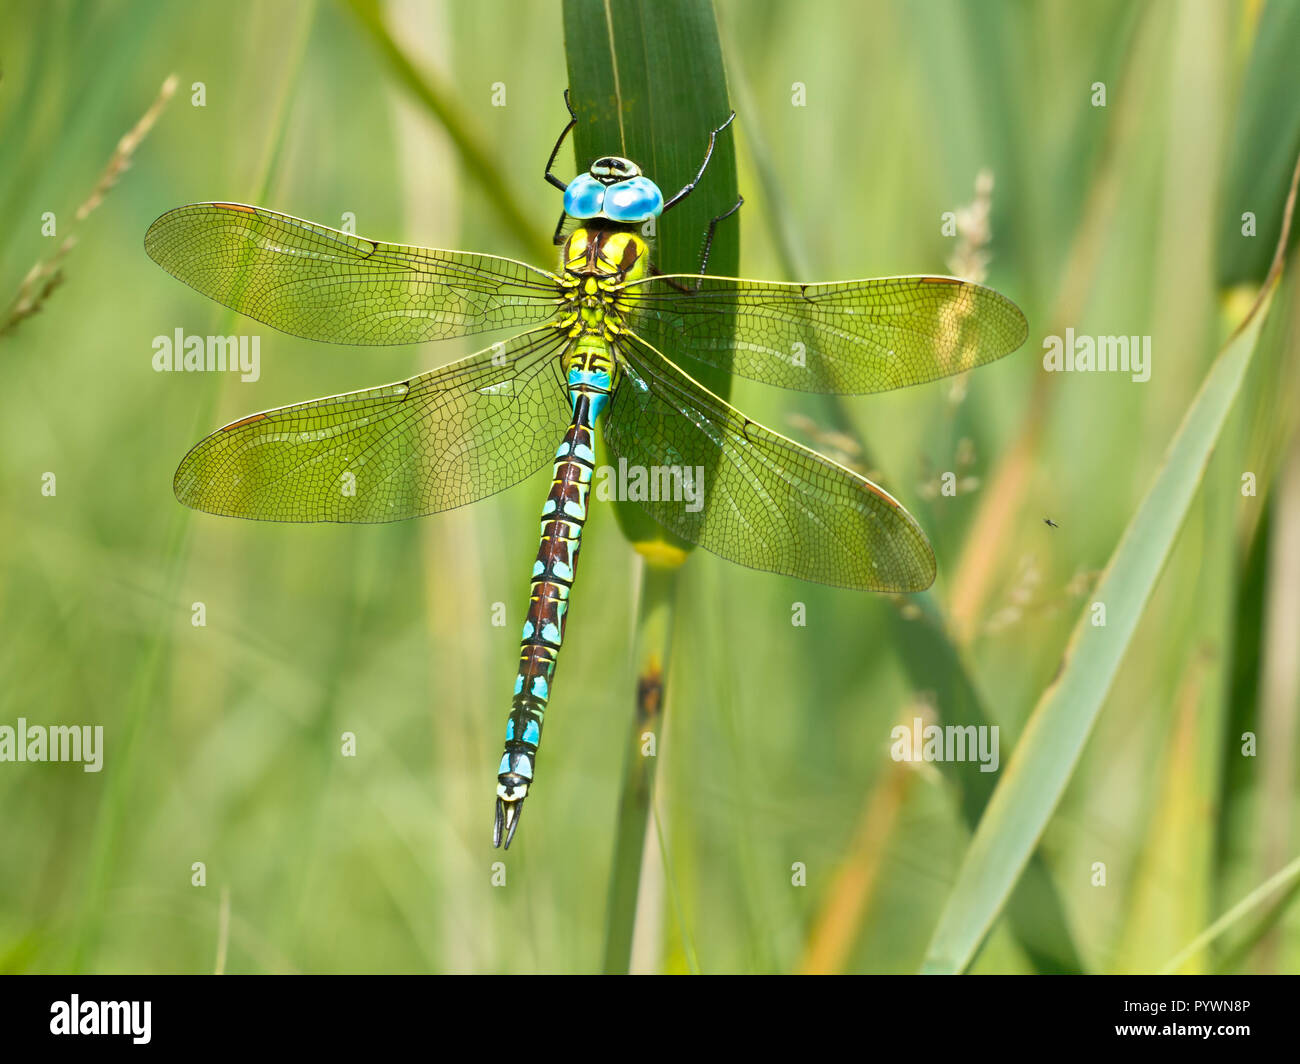 Green Hawker Dragonfly (Aeshna viridis) resting on the leafs of reed (Phragmites australis) in natural habitat Stock Photo